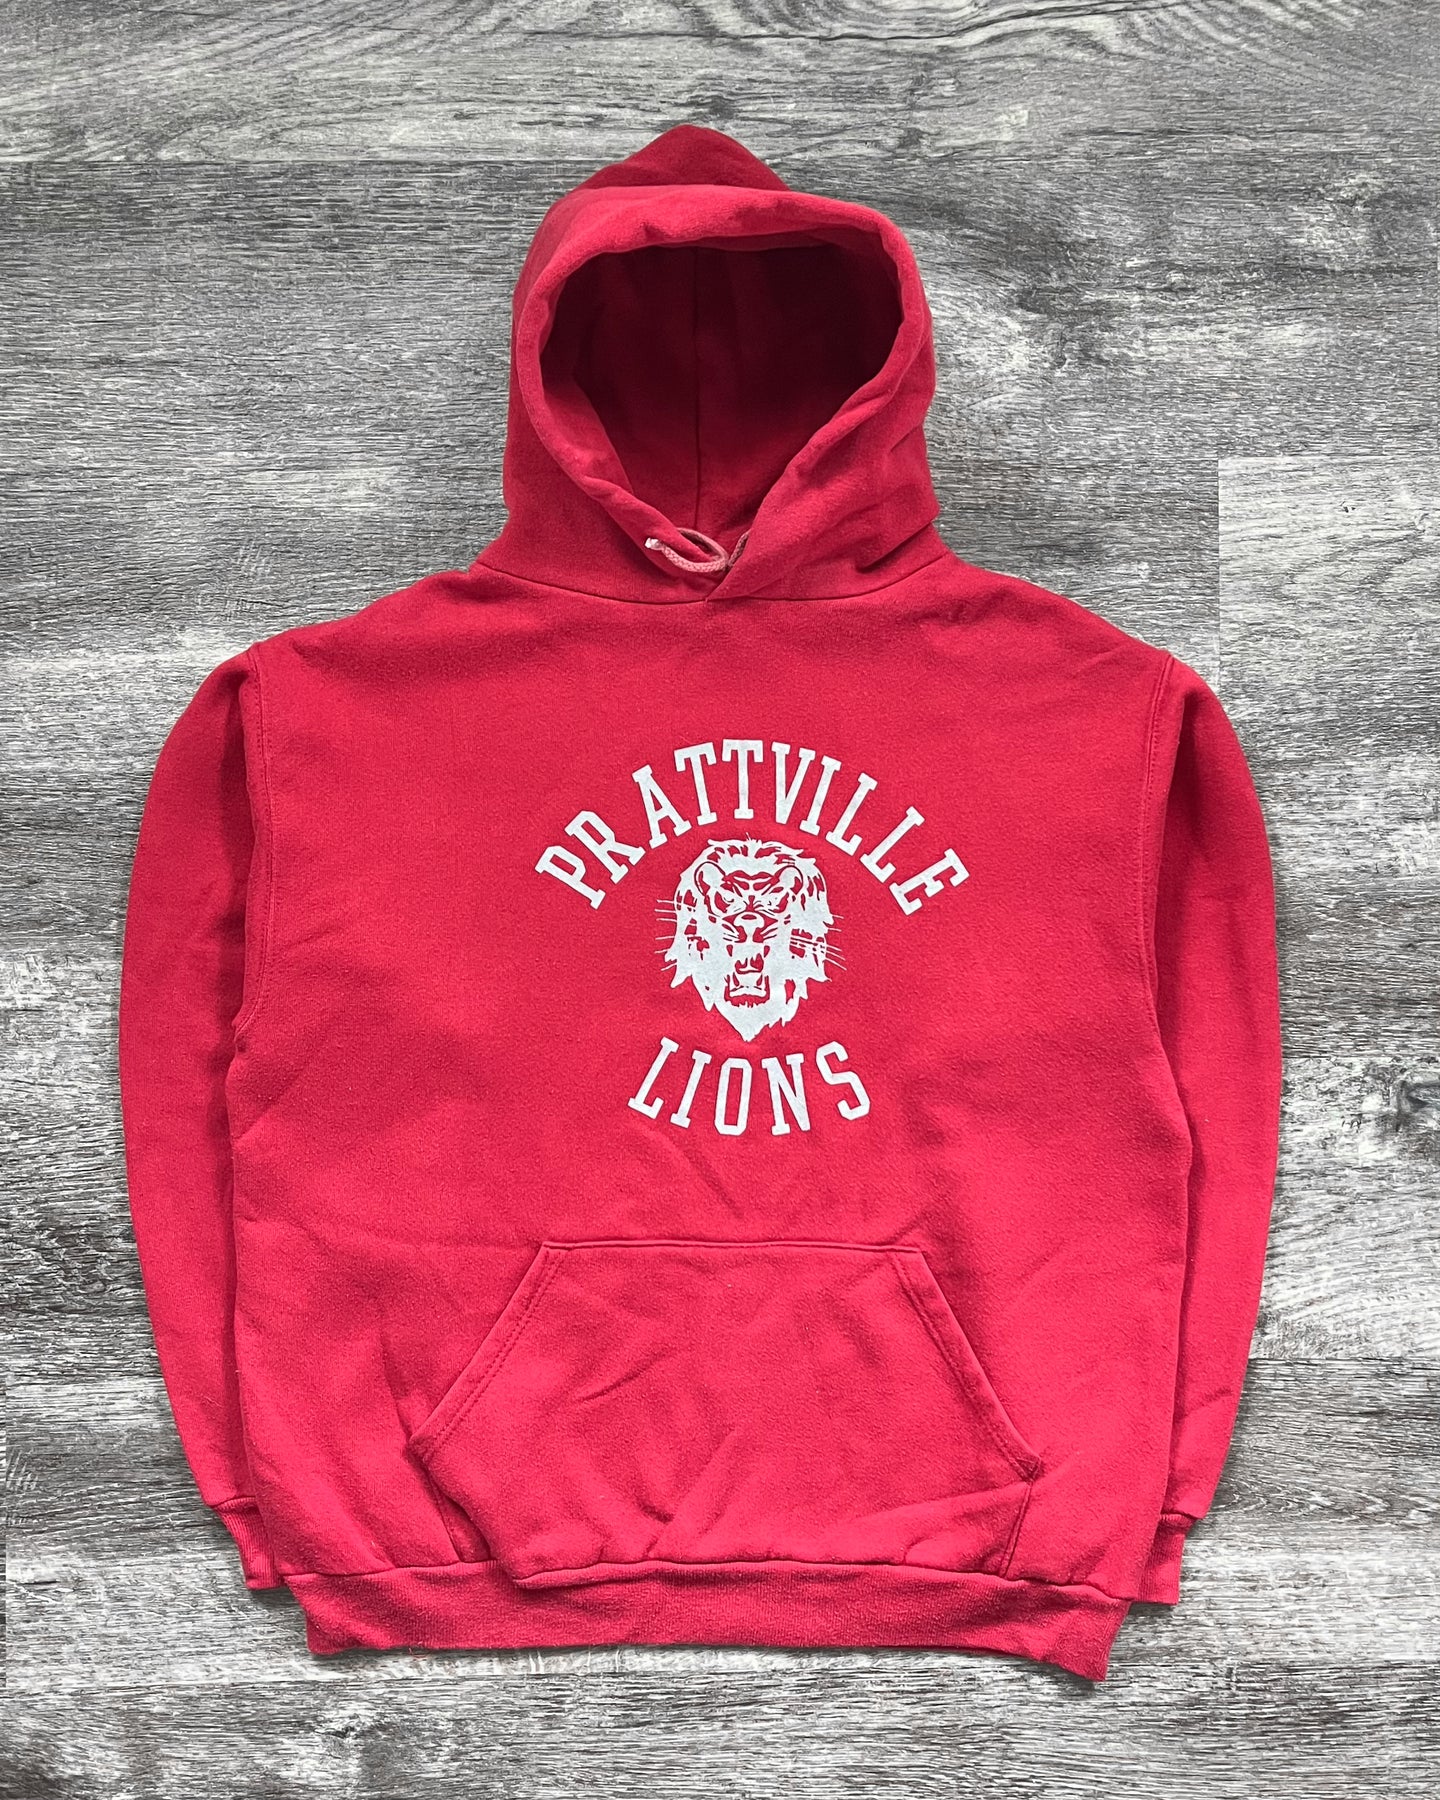 1990s Prattville Lions Collegiate Hoodie - Size Large